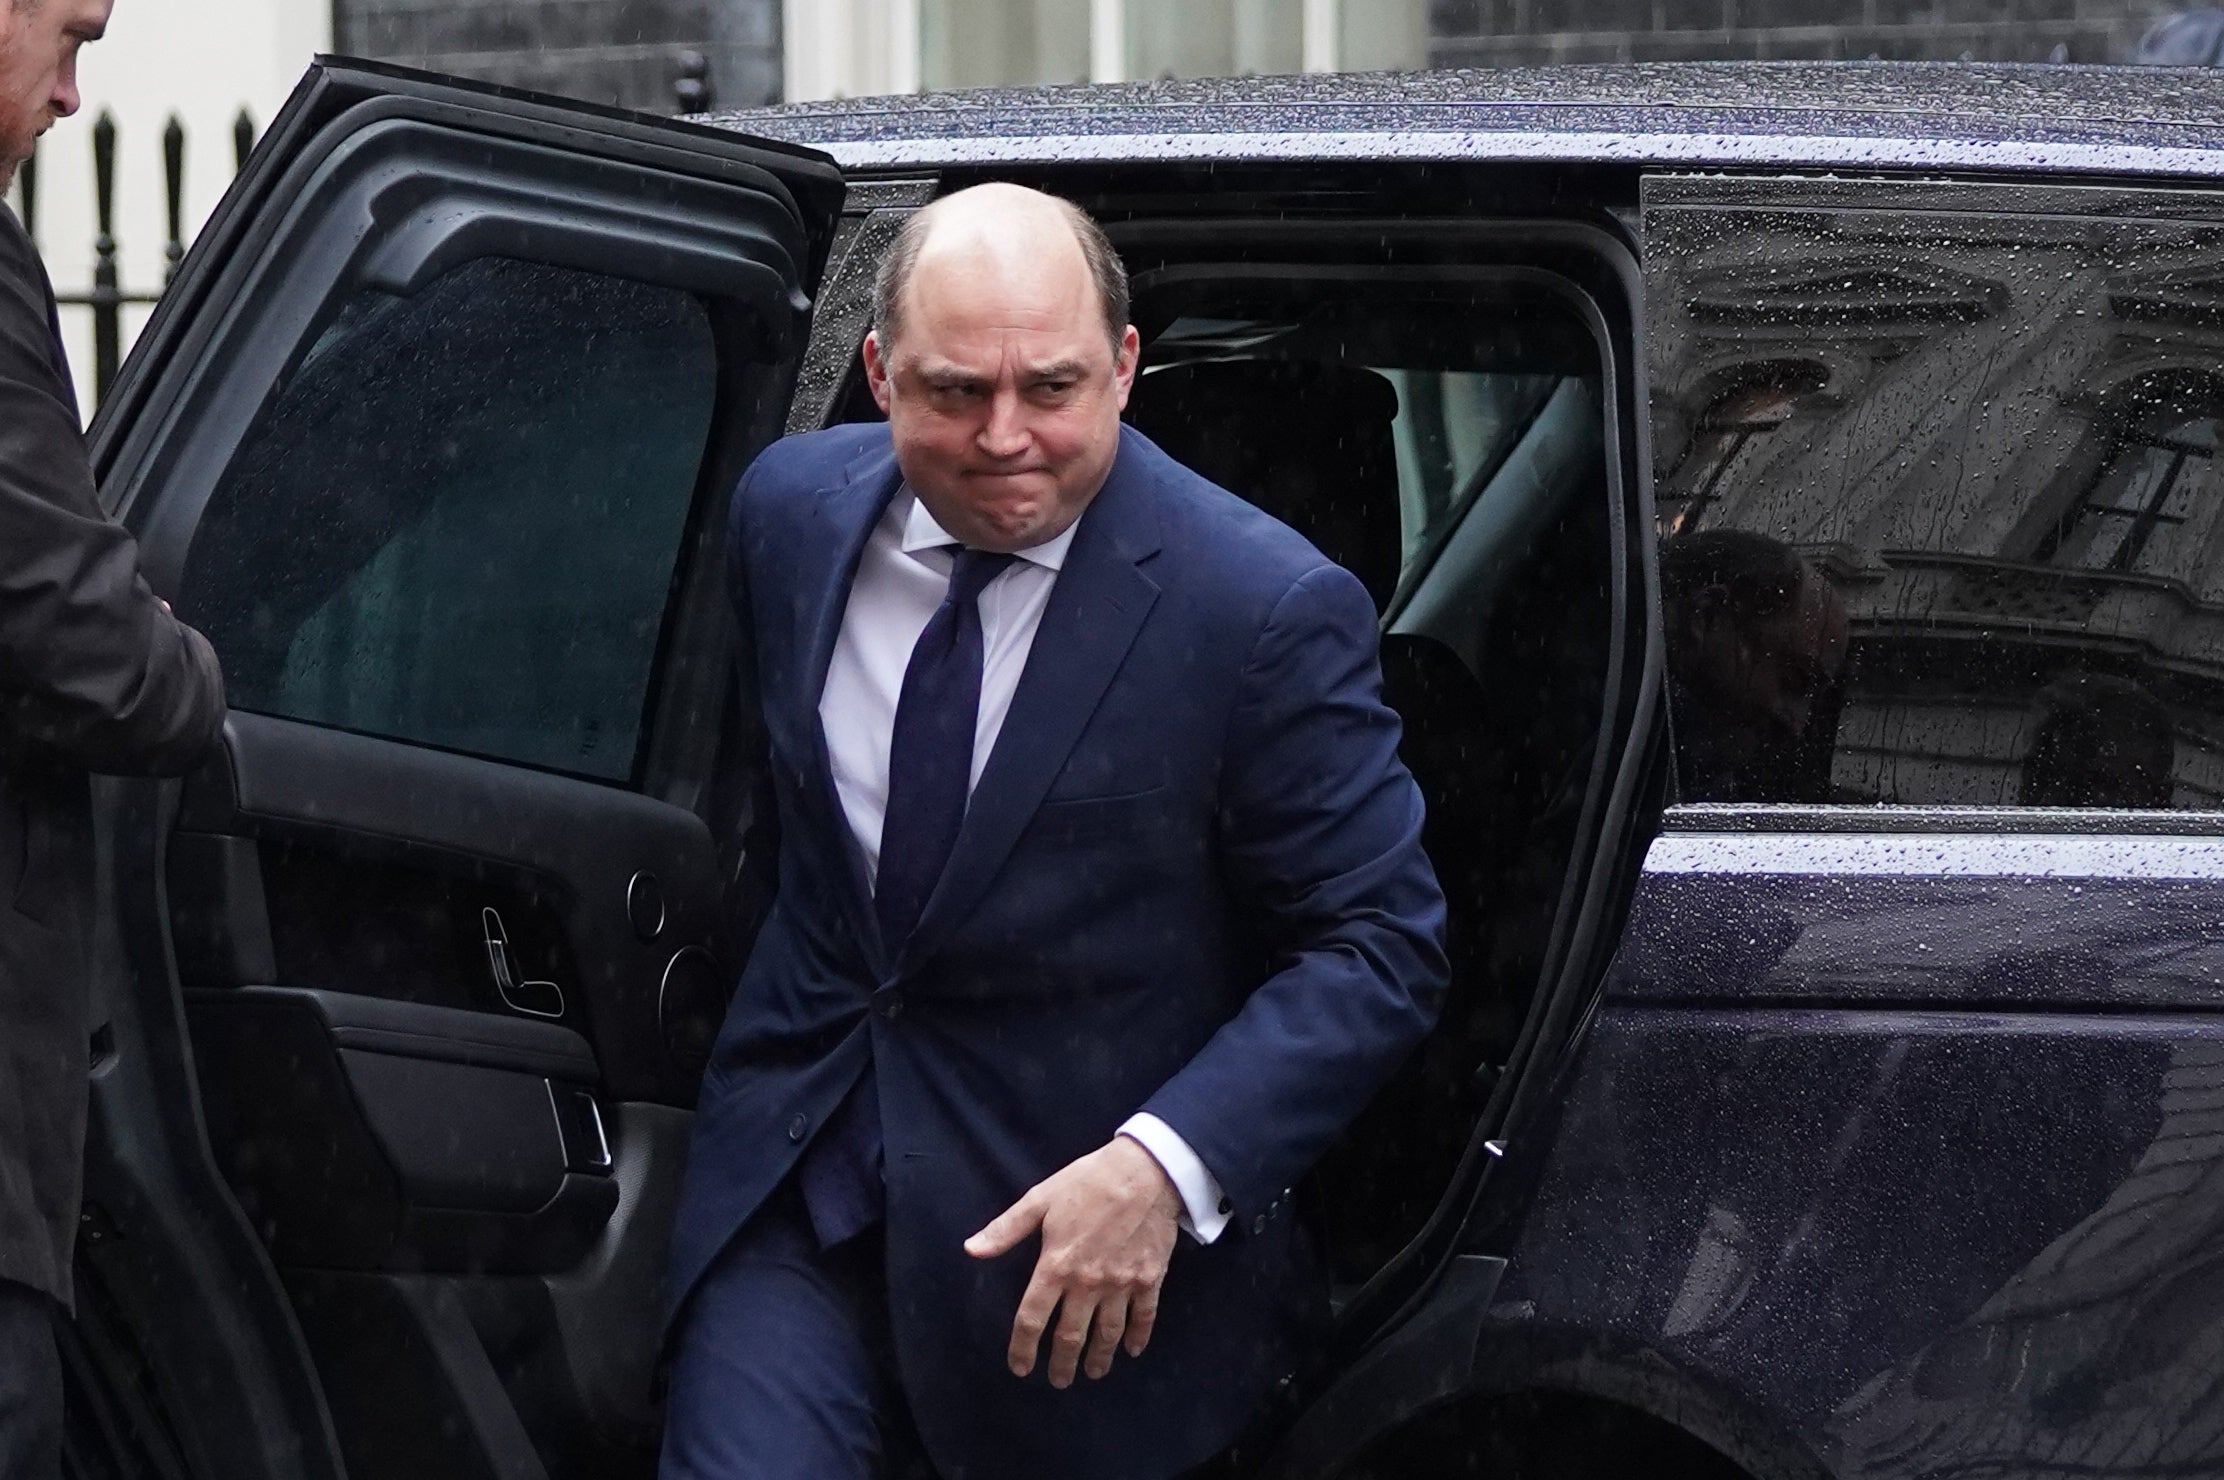 Defence Secretary Ben Wallace arrives in Downing Street, London, ahead of a meeting of the Government’s Cobra emergency committee (PA)